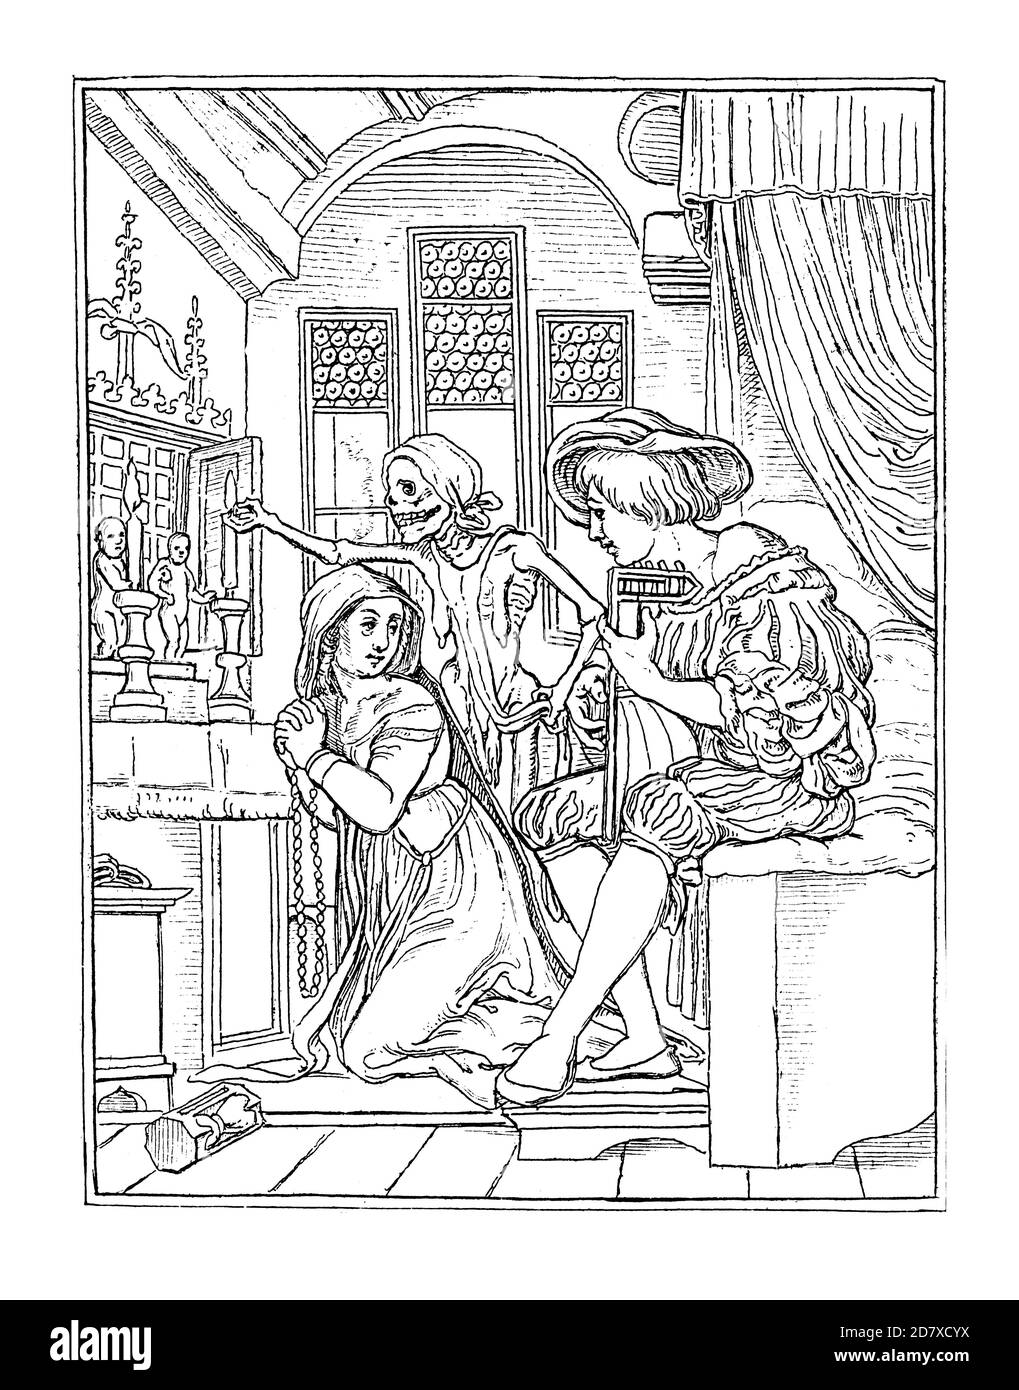 Antique 19th-century illustration depicting woodcut from the Dance of Death series by Hans Holbein the Younger. Published in Systematischer Bilder-Atl Stock Photo